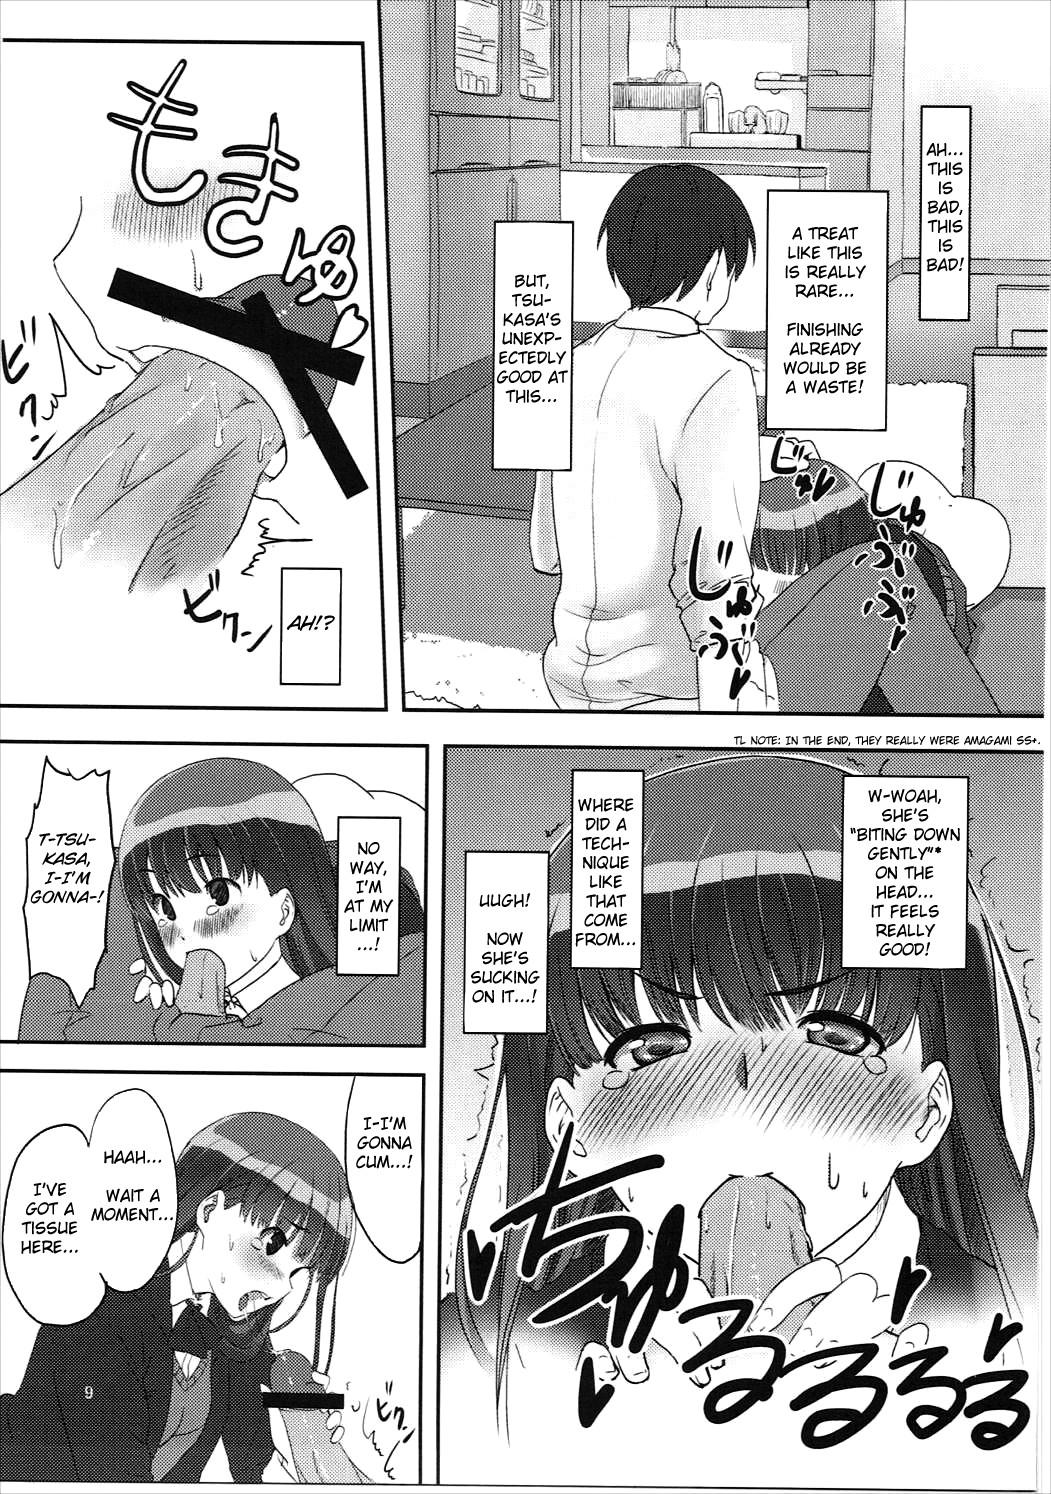 Nut Happy end! - Amagami Full Movie - Page 10